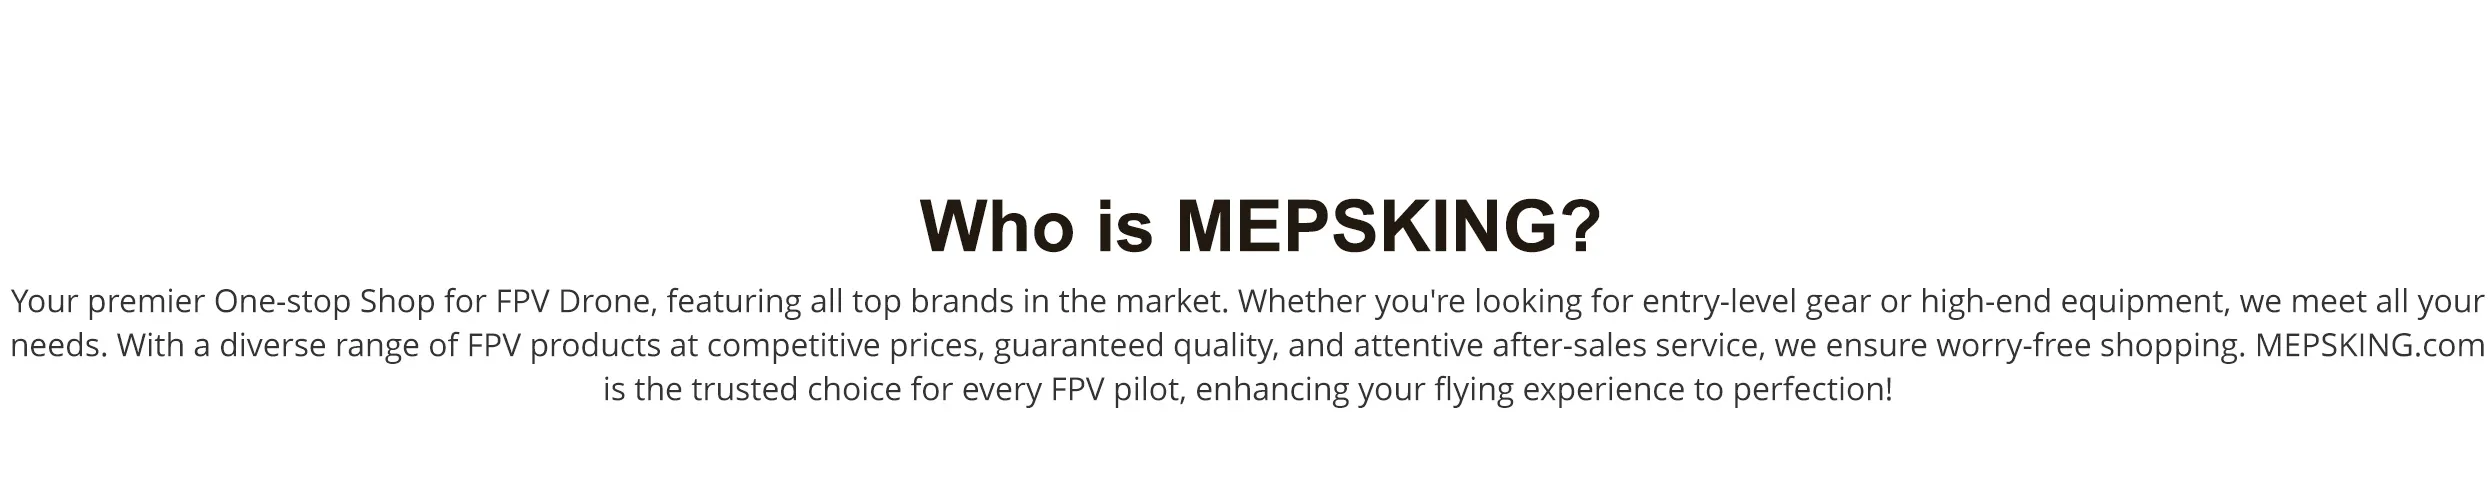 Who is MEPSKING